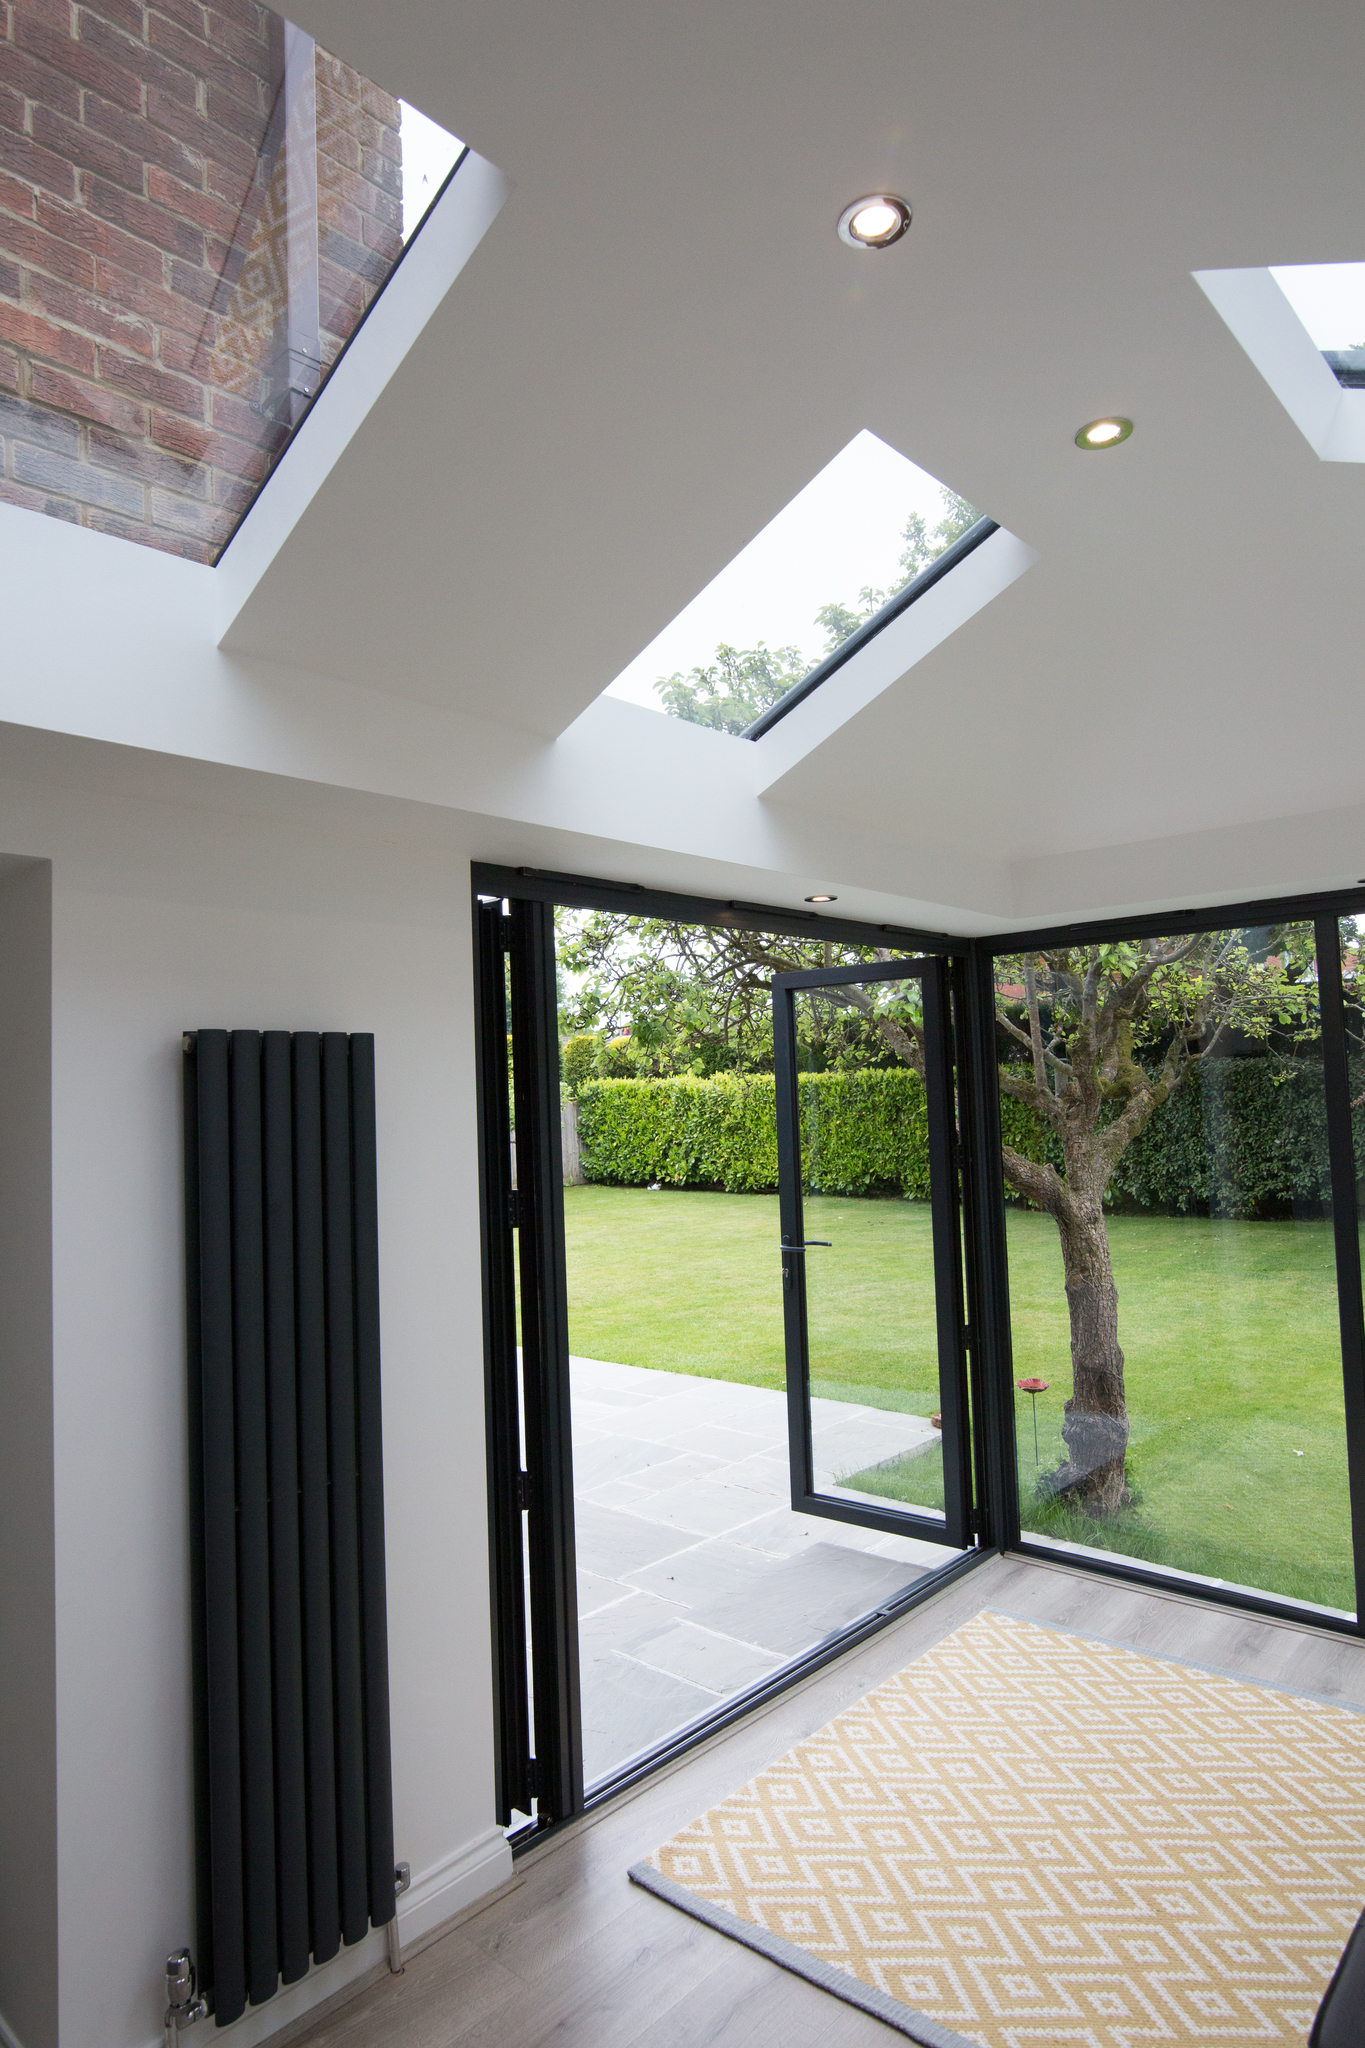 Inside shot of a Livin room conservatory model with wide french doors.